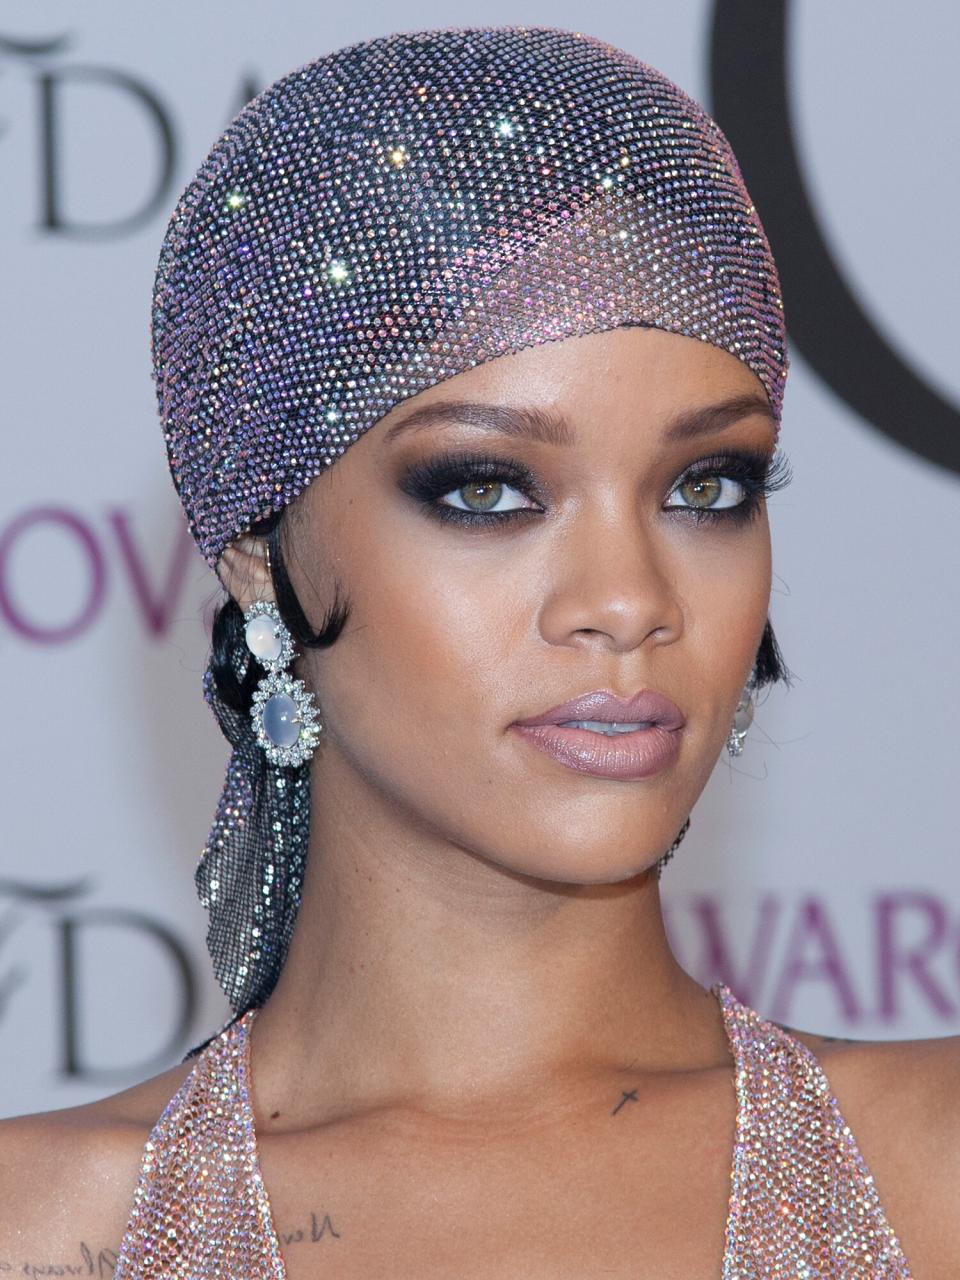 Rihanna attends the "2014 CFDA Fashion Awards" red carpet arrivals at Alice Tully Hall in New York City